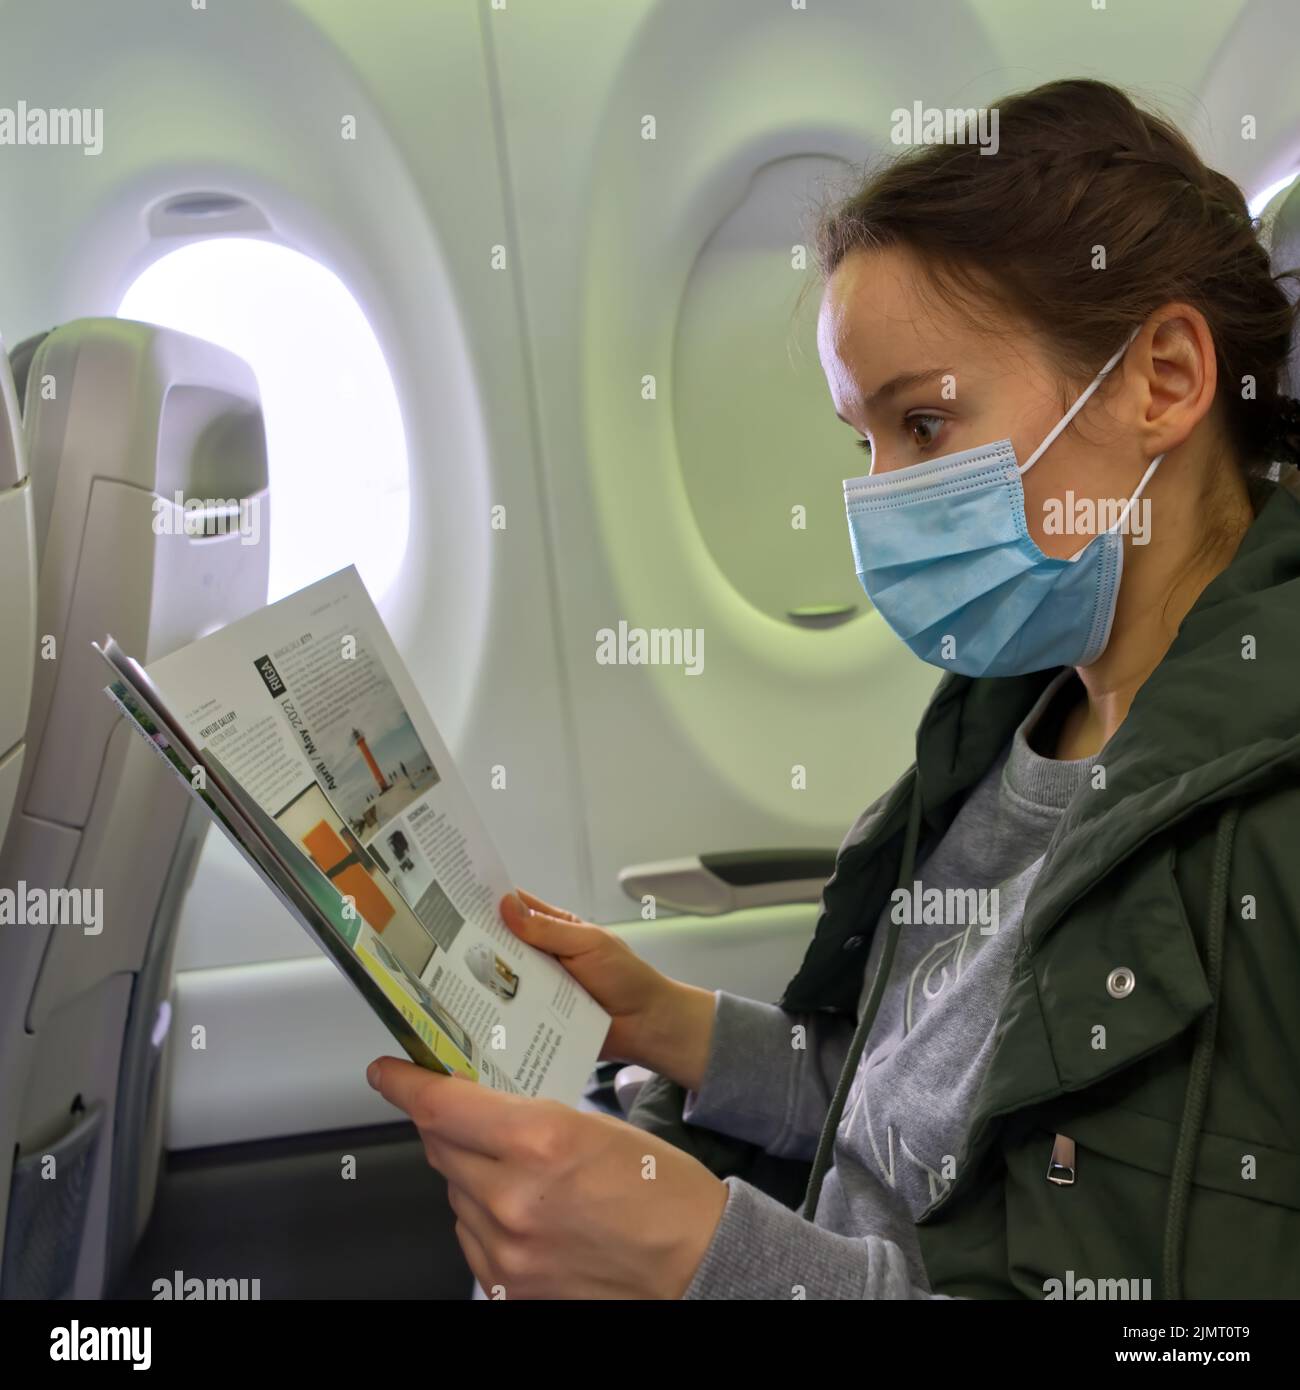 female traveler wearing a mask to prevent covid-19 infection while traveling on an airplane watching a magazine Stock Photo